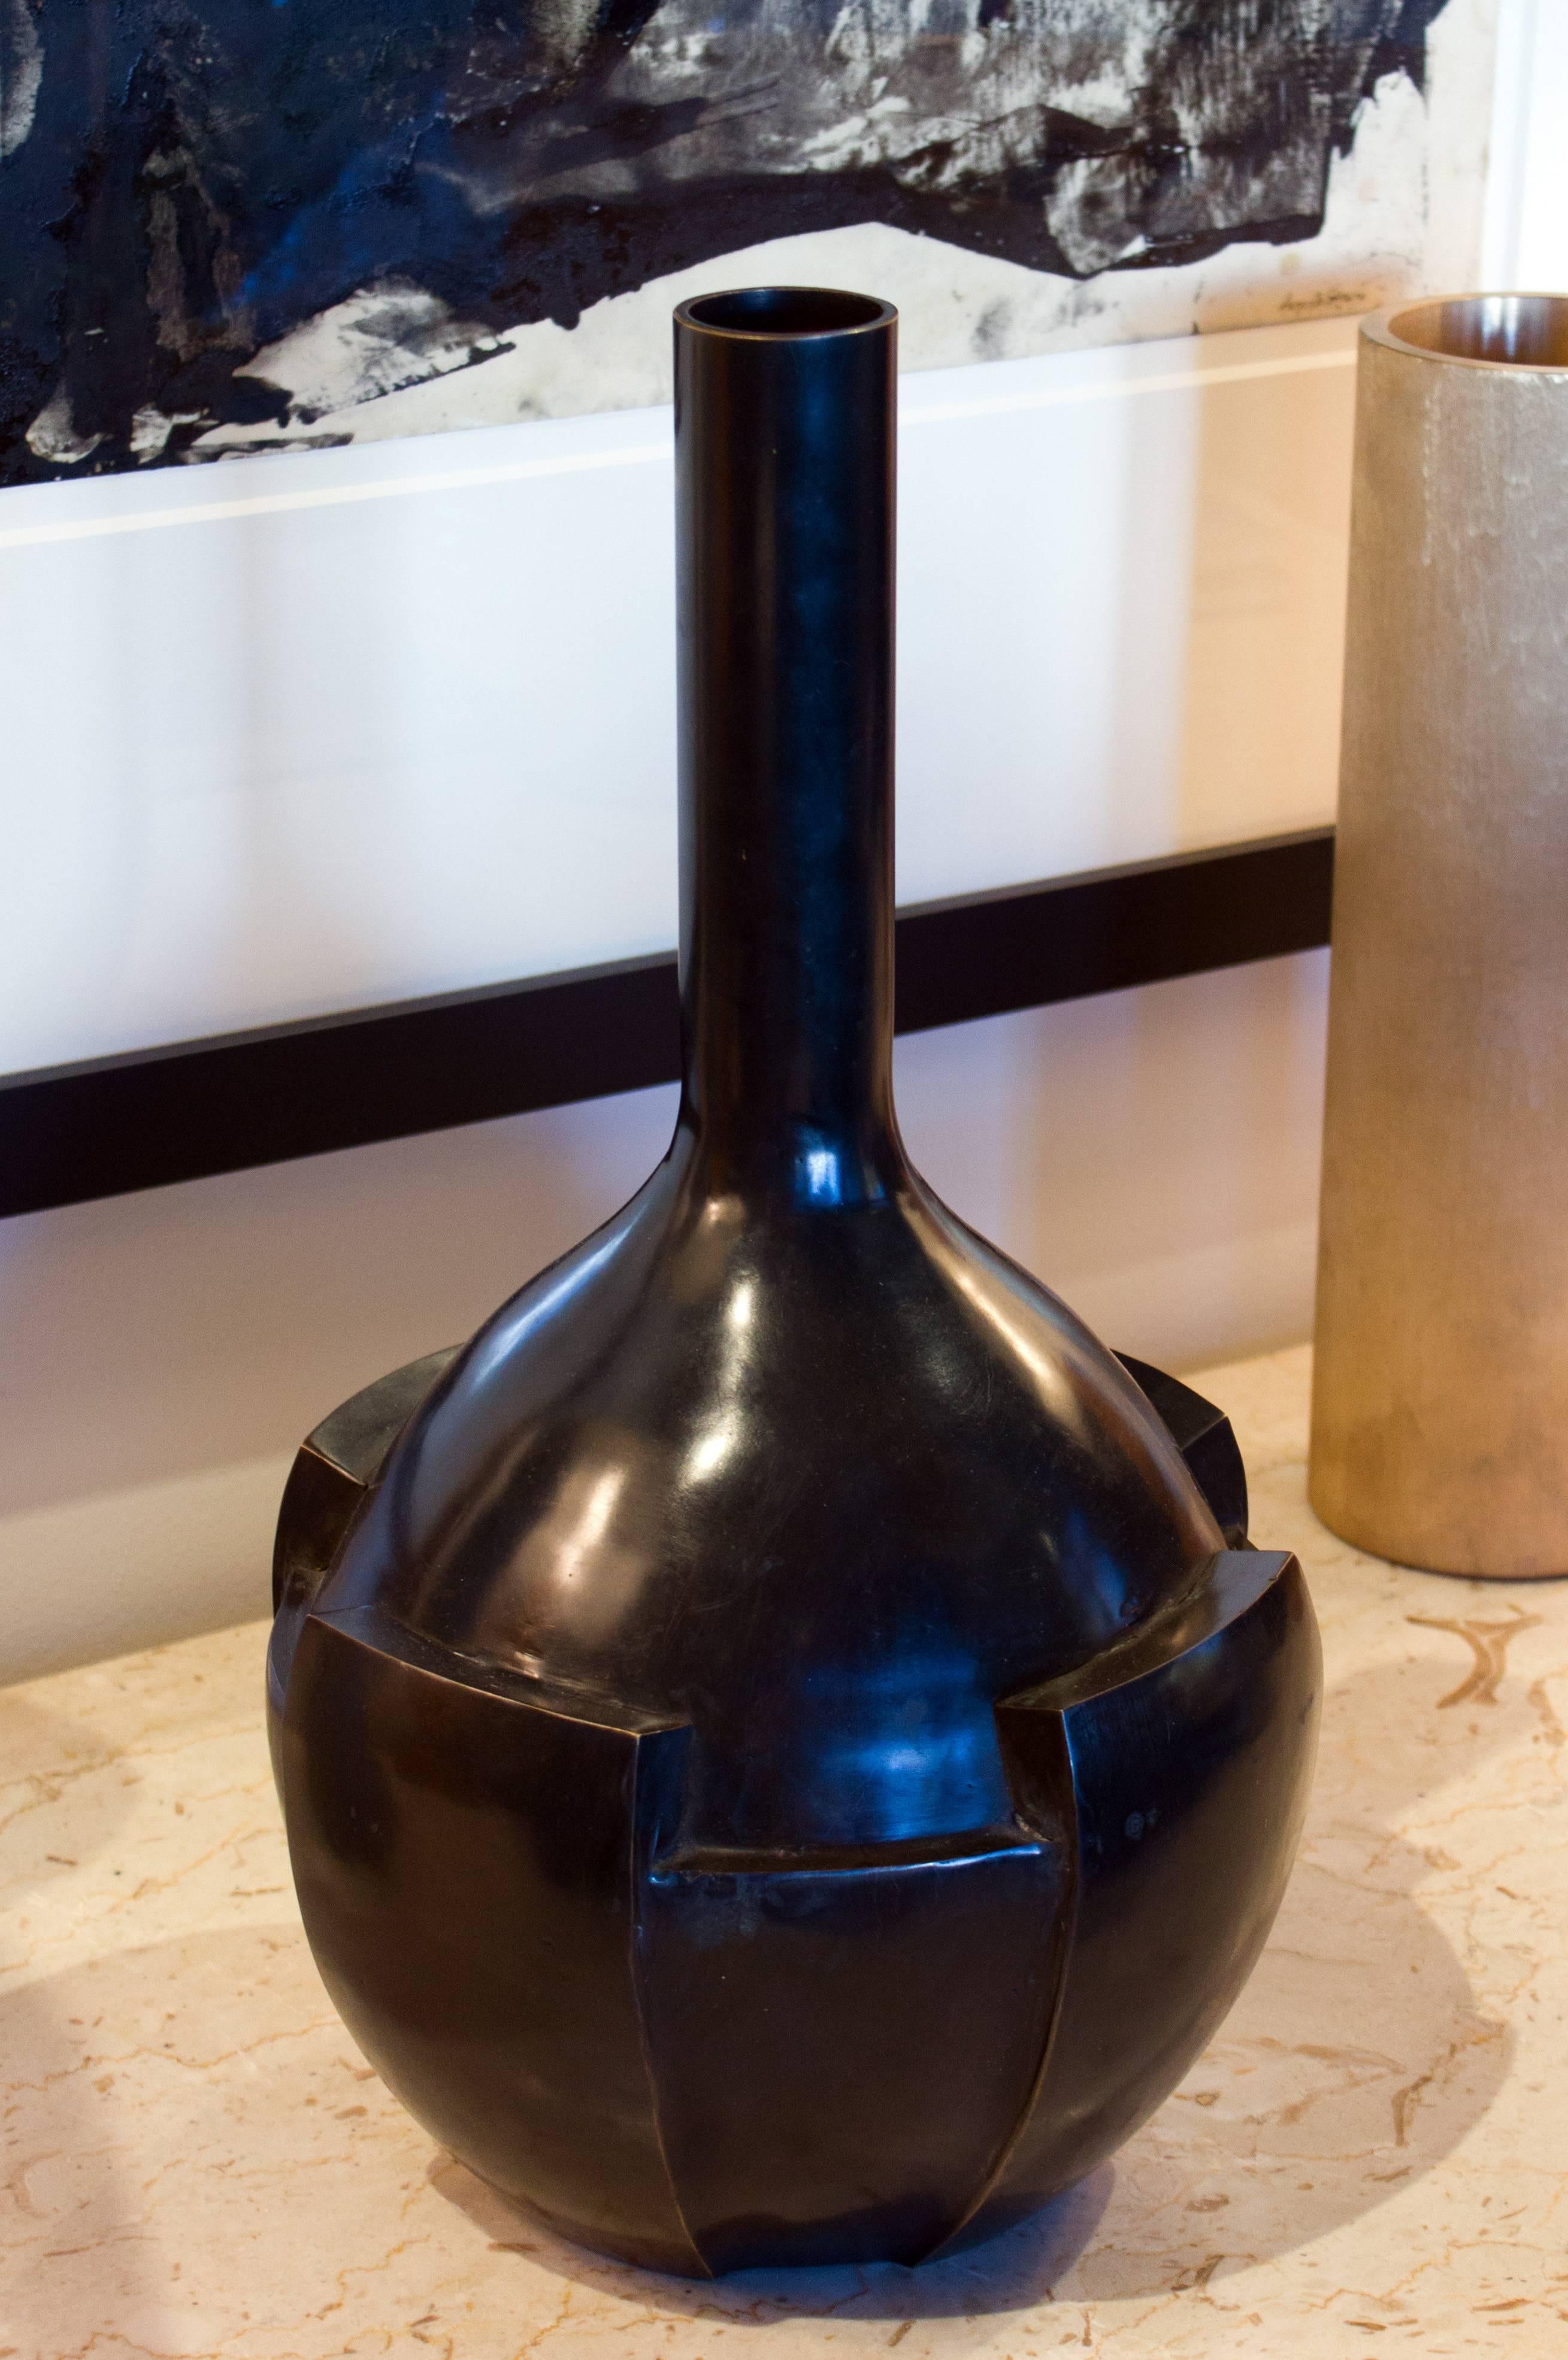 This stylized form is a modern take on the 1940s Art Deco designs. The Thomas Pheasant Petal Vase is updated with angular lines and squared edges. Dark bronze.